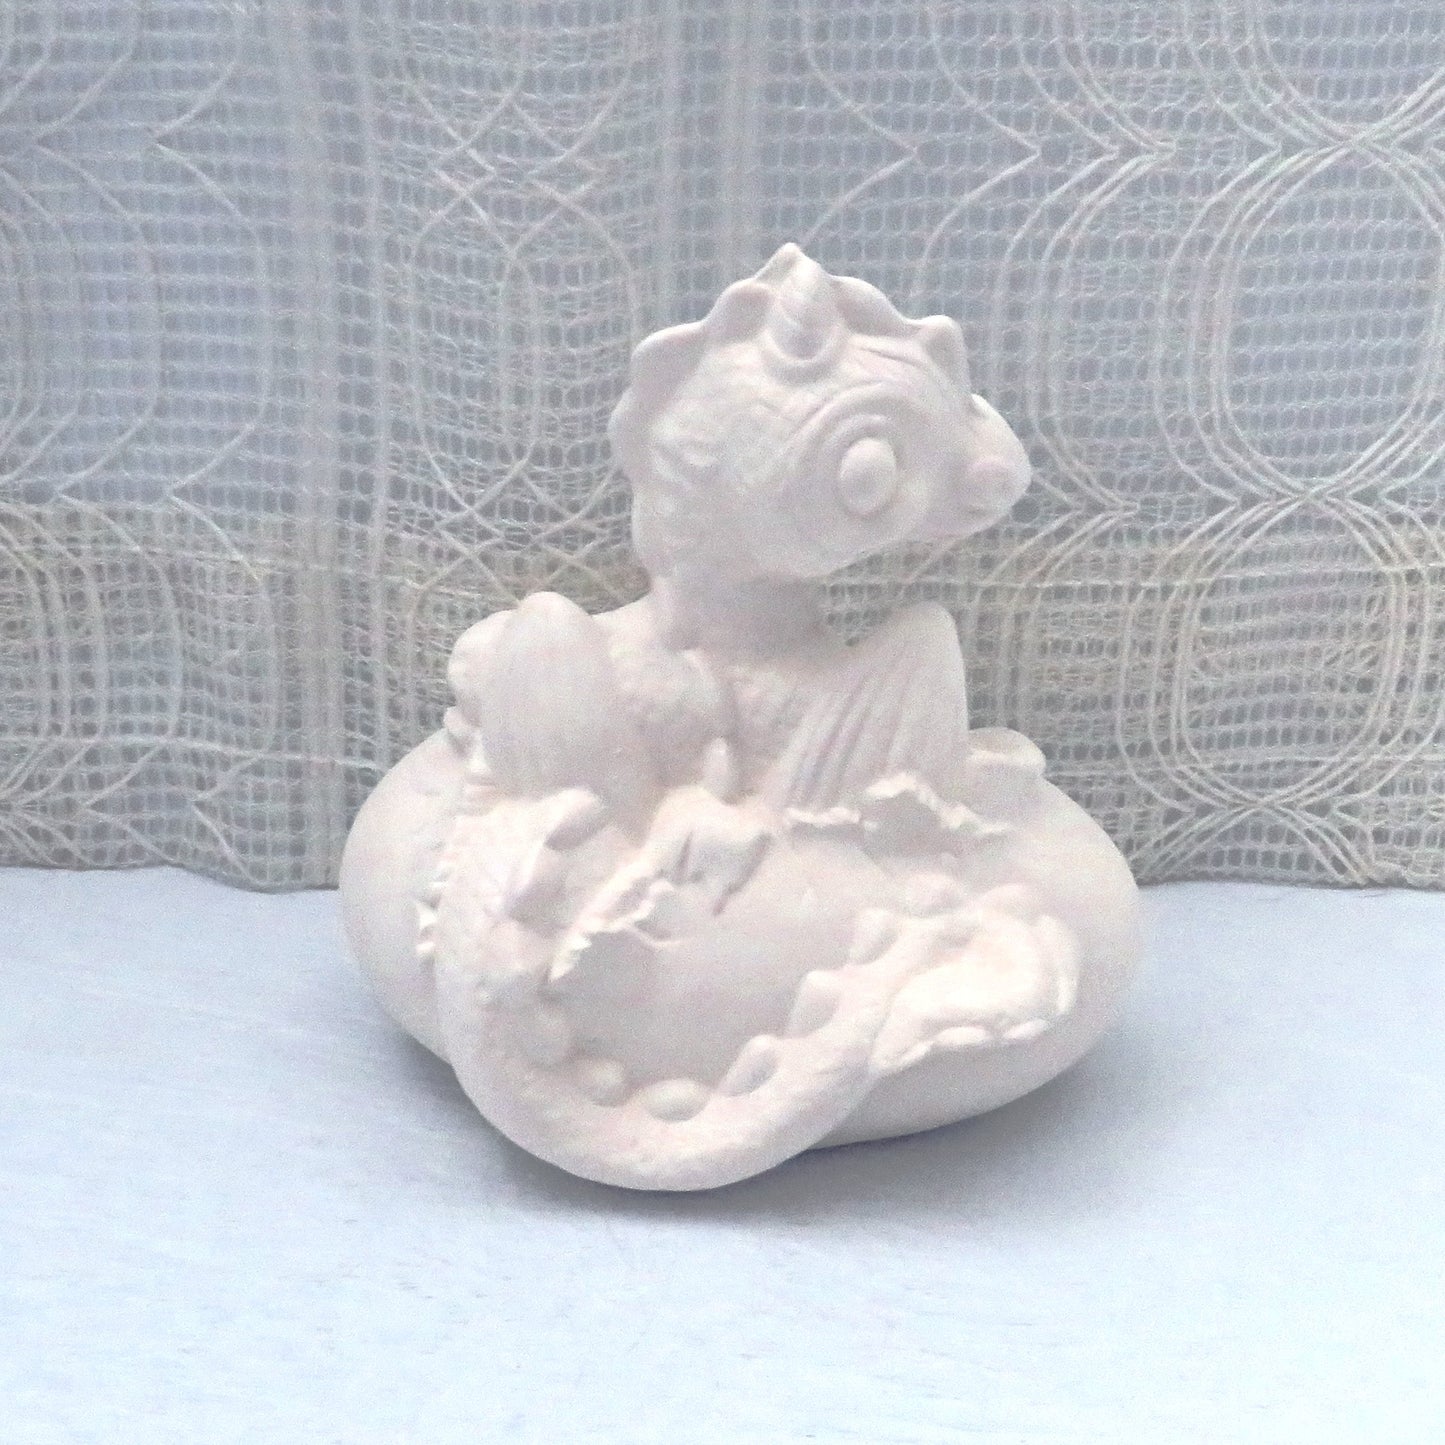 Rear view of ready to paint ceramic baby dragon showing it's wings and tail.